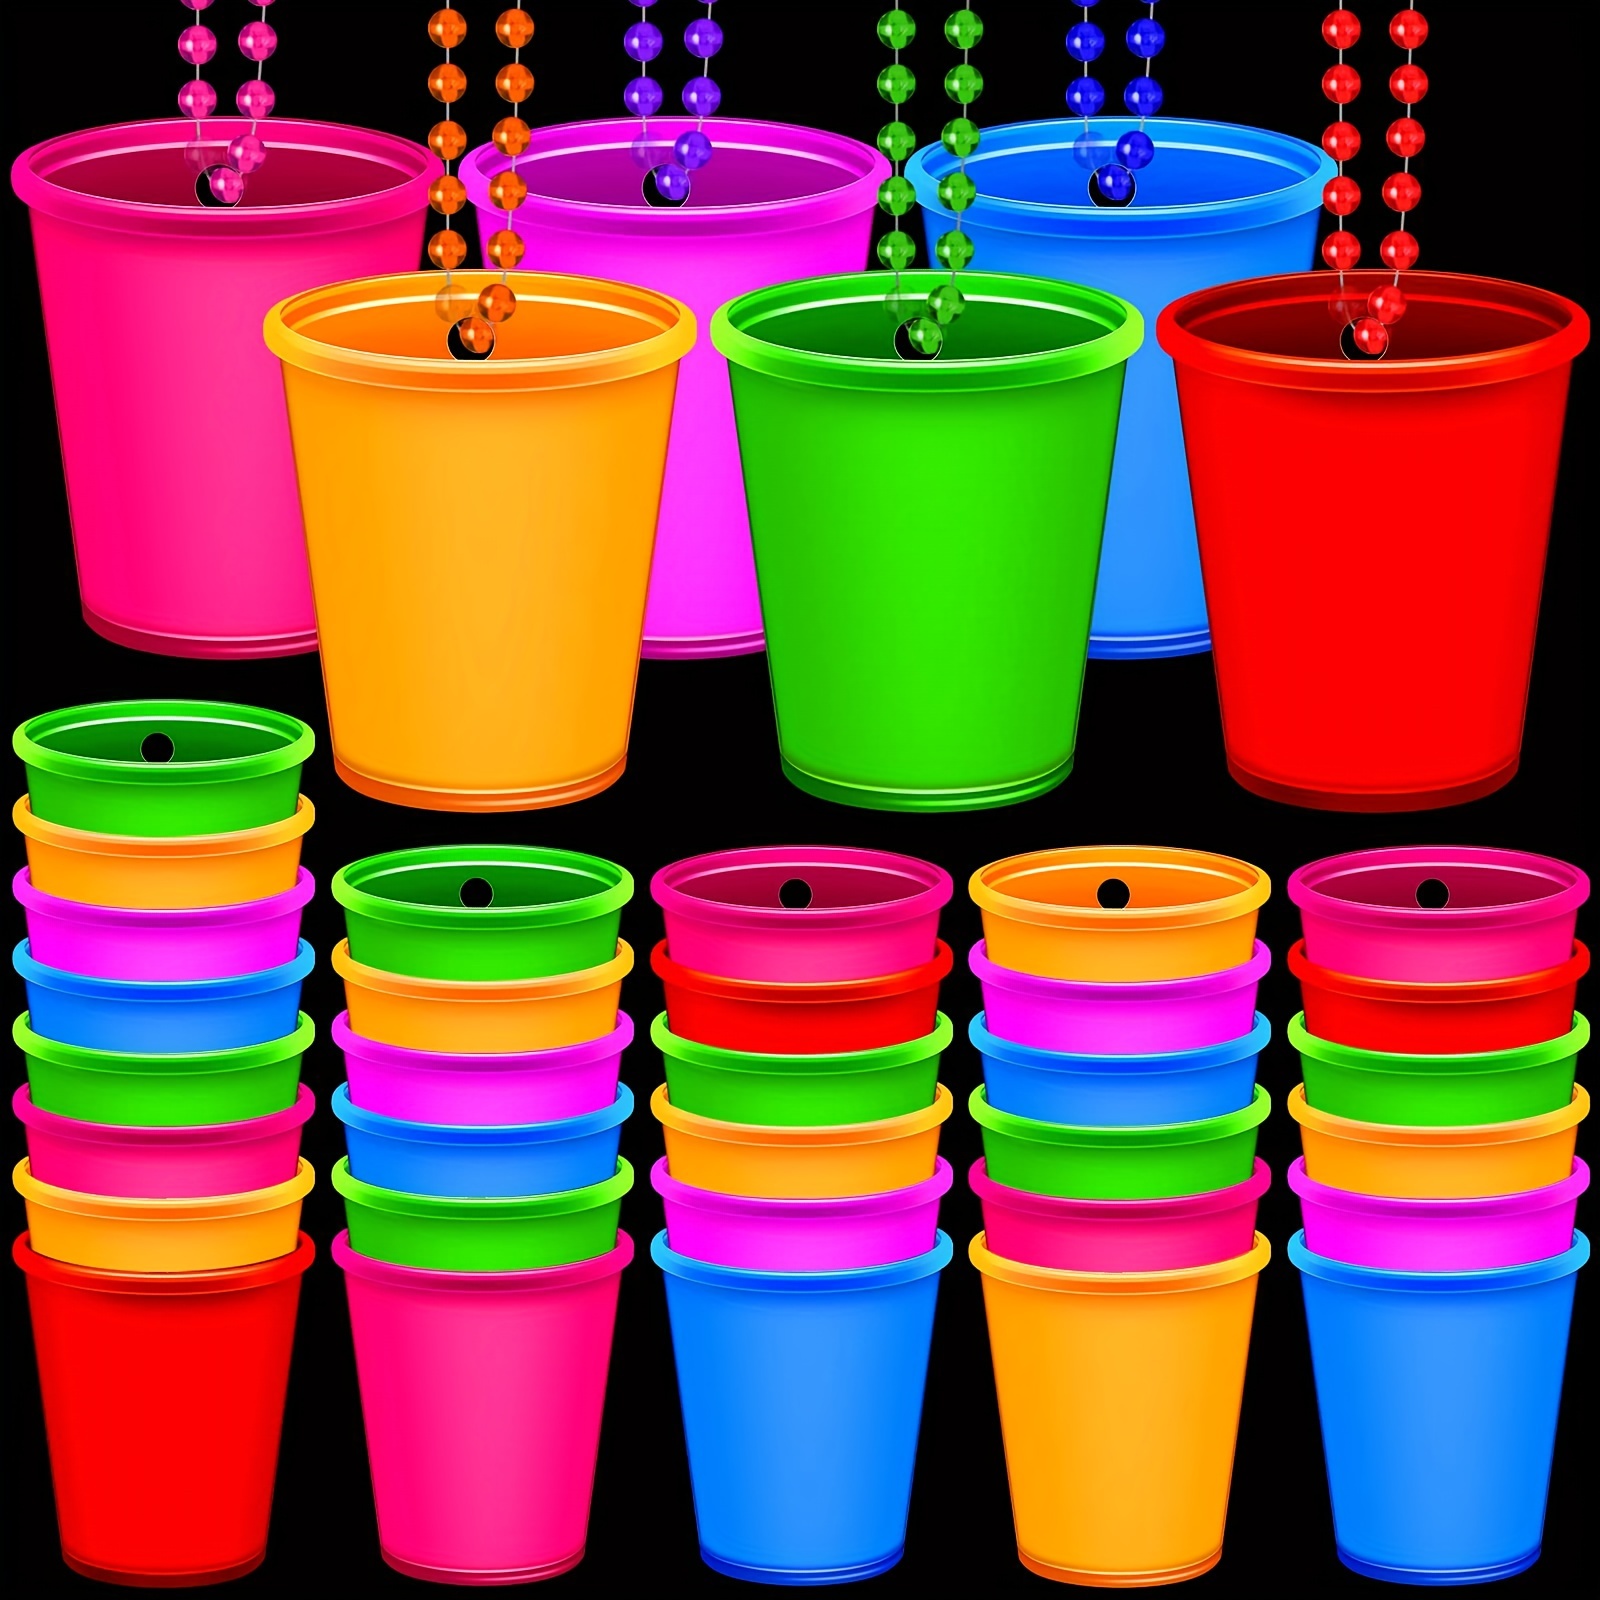 

10pcs Shot Glass Necklaces Light Up Necklace Shot Glasses Glow In The Dark Neon Plastic Shot Necklace Cups On Beaded For Halloween Christmas Wedding Glowing Party Favor